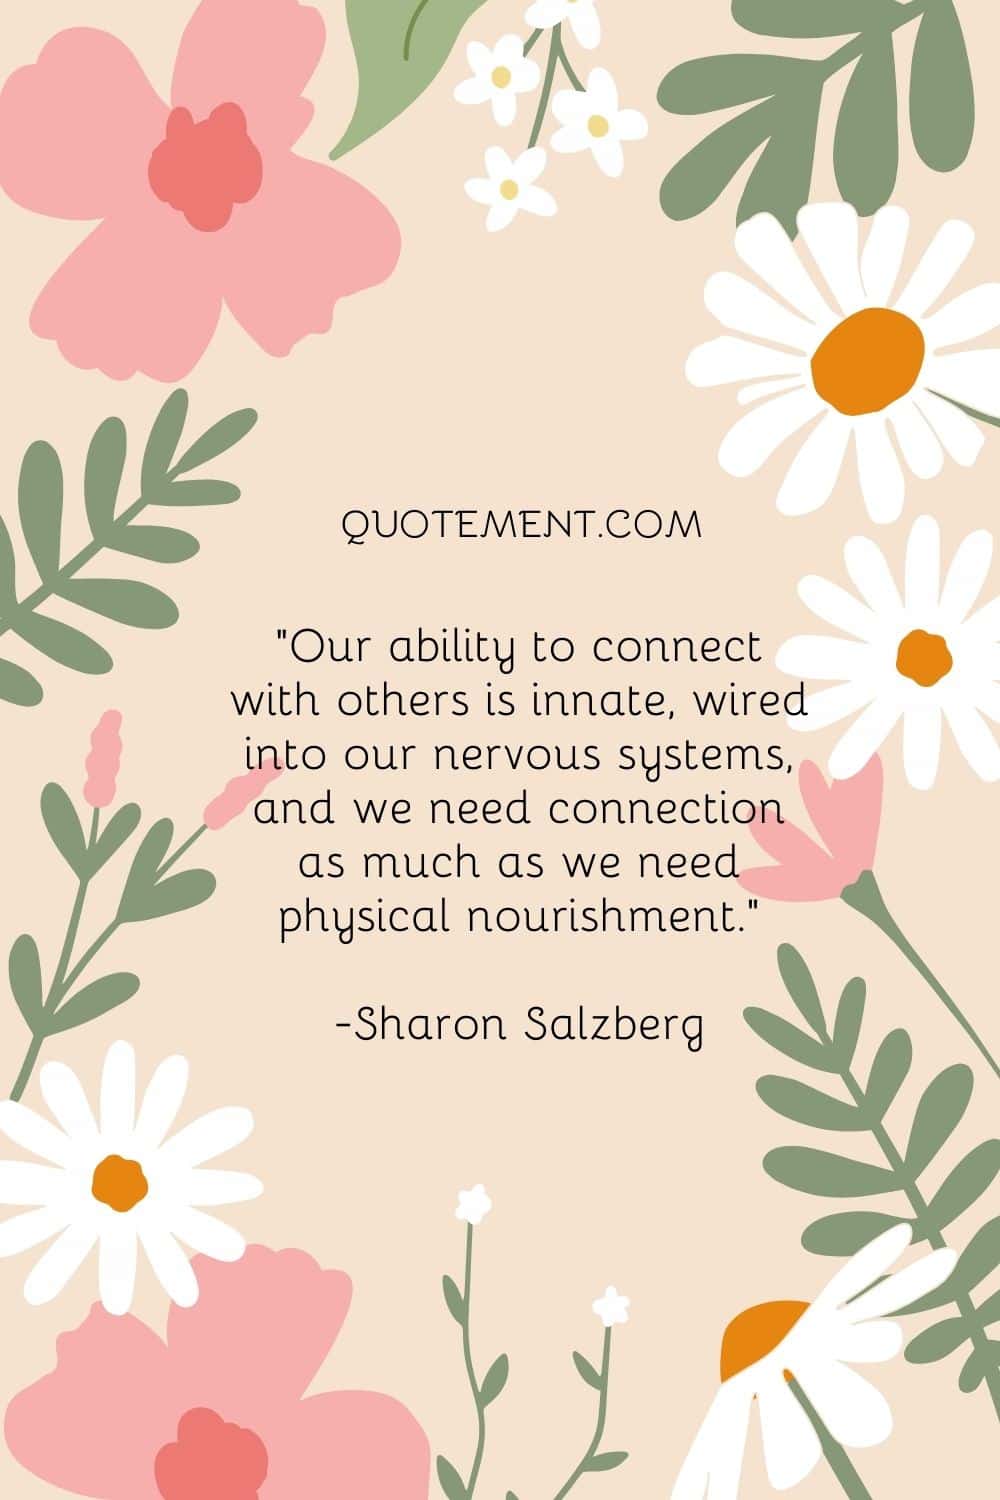 Our ability to connect with others is innate, wired into our nervous systems